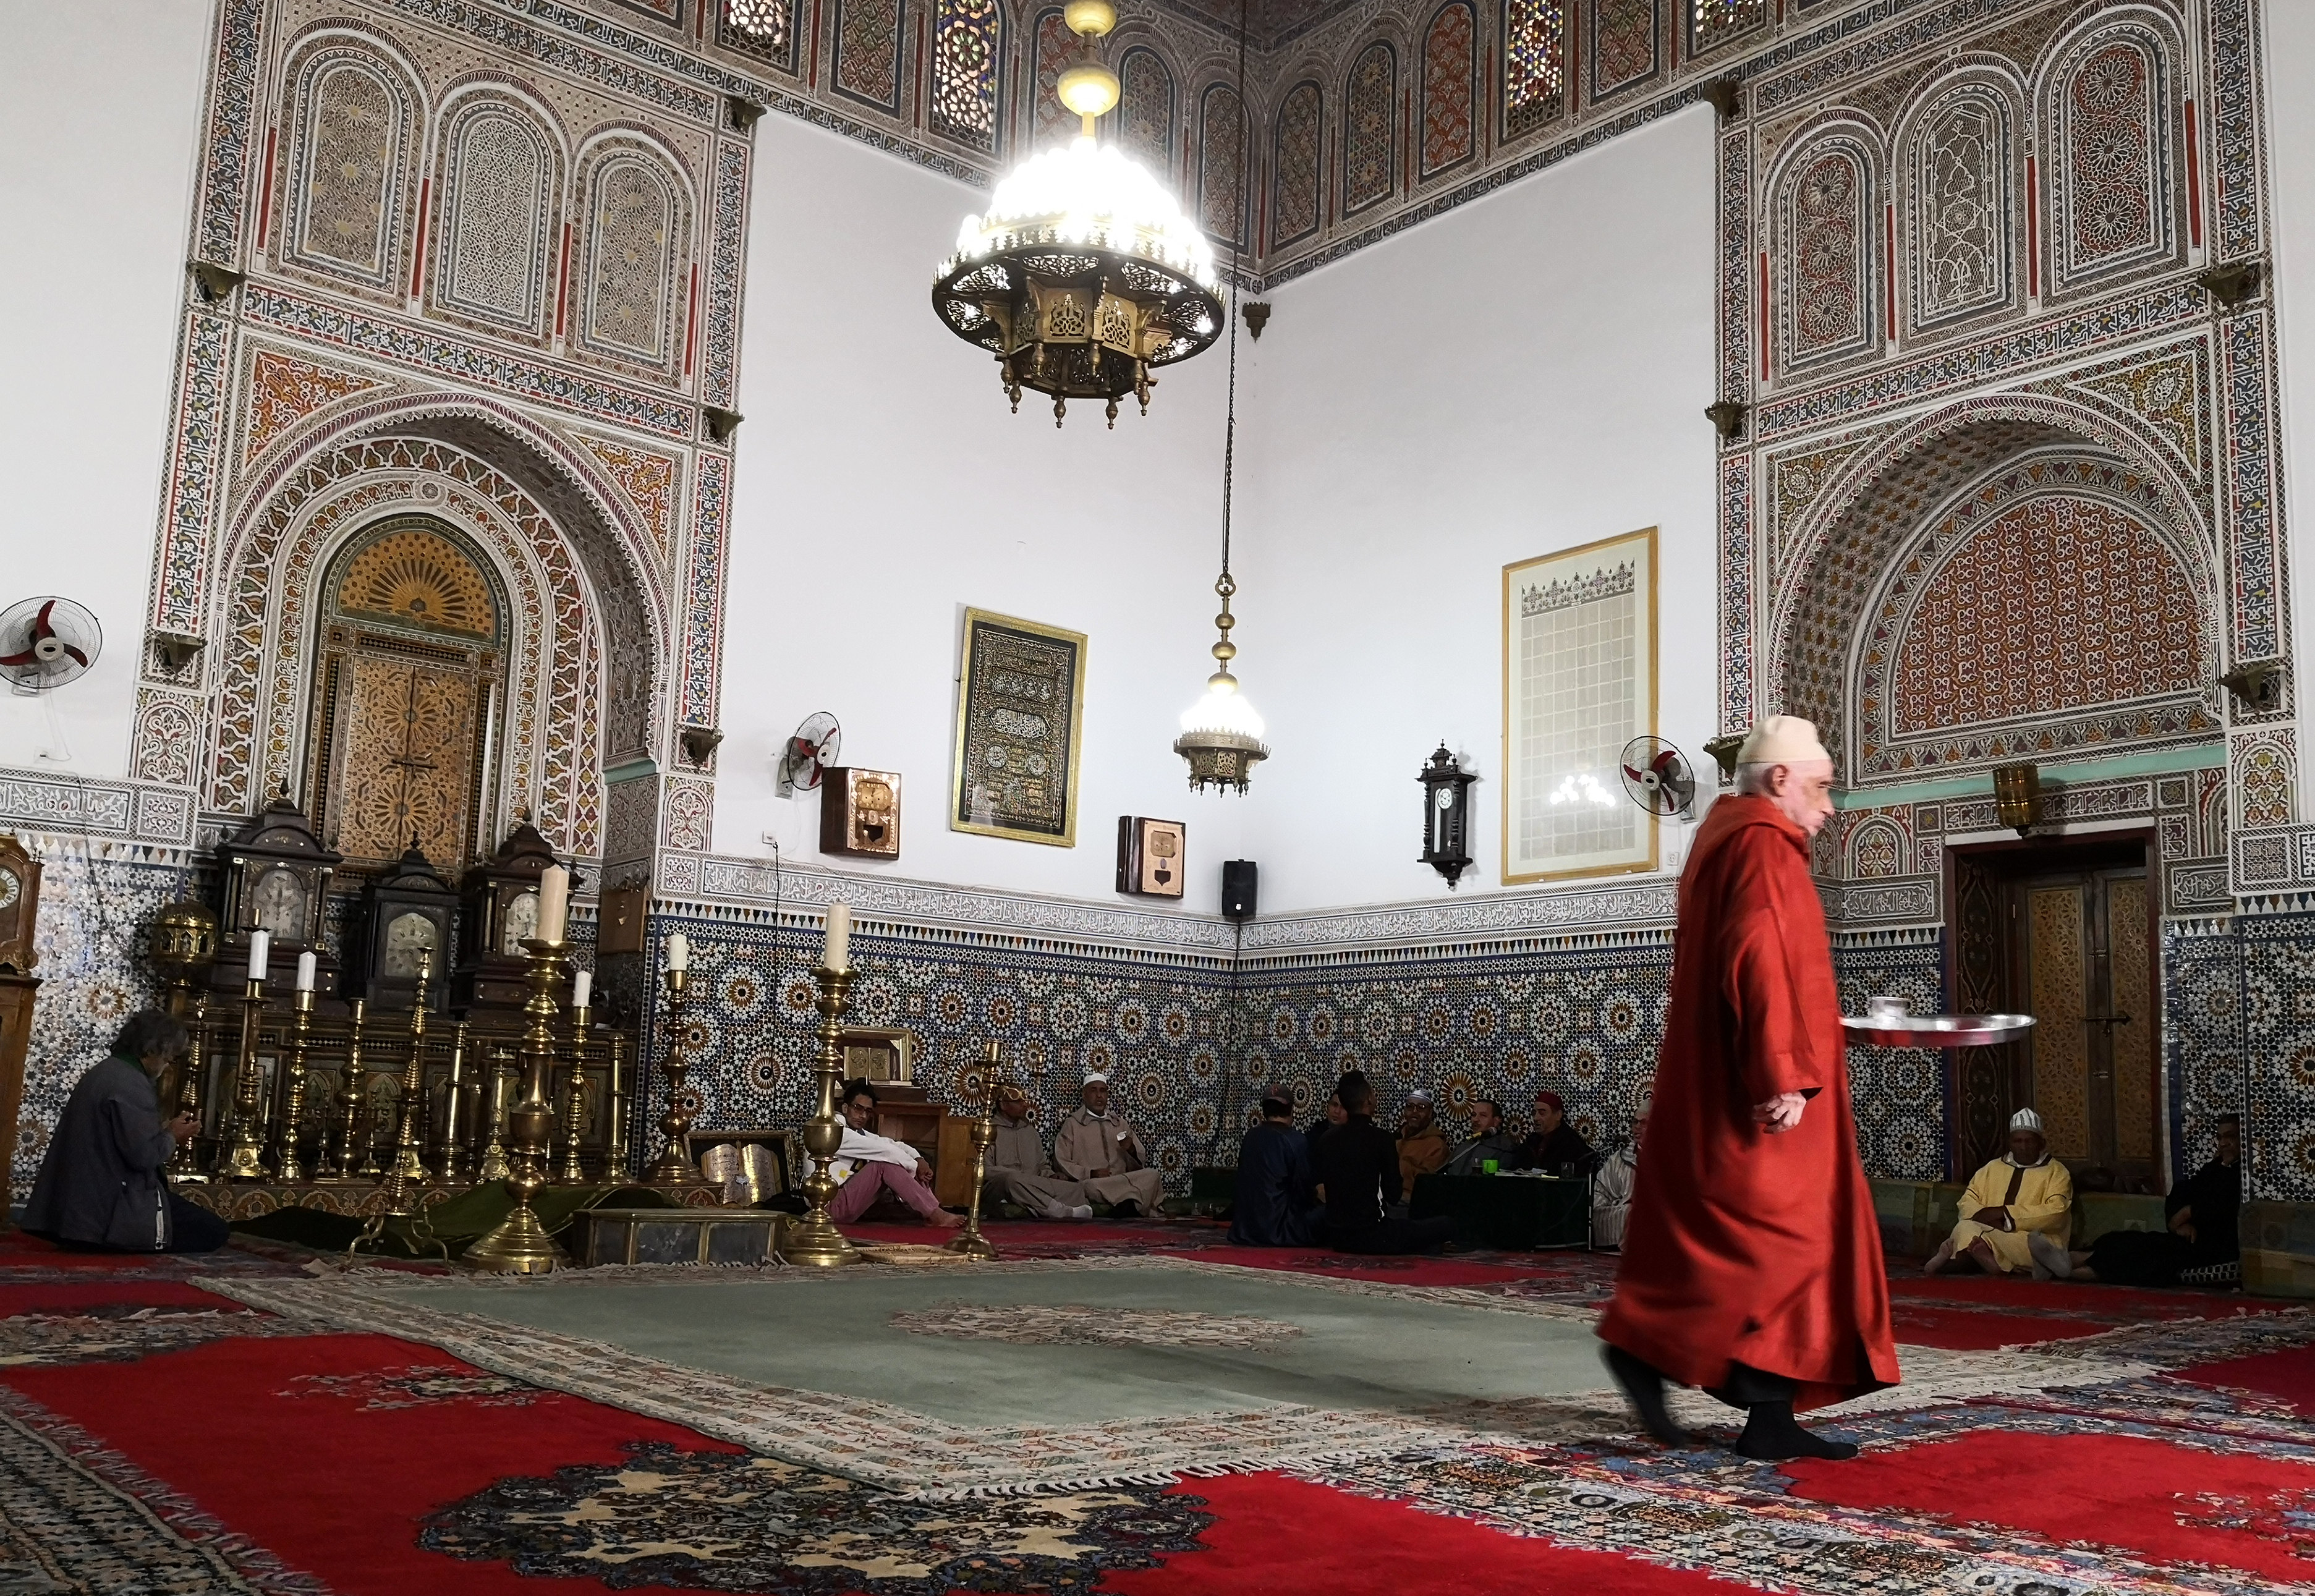 "Sufism is serious Islam. It is the heart and the fundamental core, the marrow of Islam. It is the station of excellence, purification, sincerity and devotion in all actions and works."